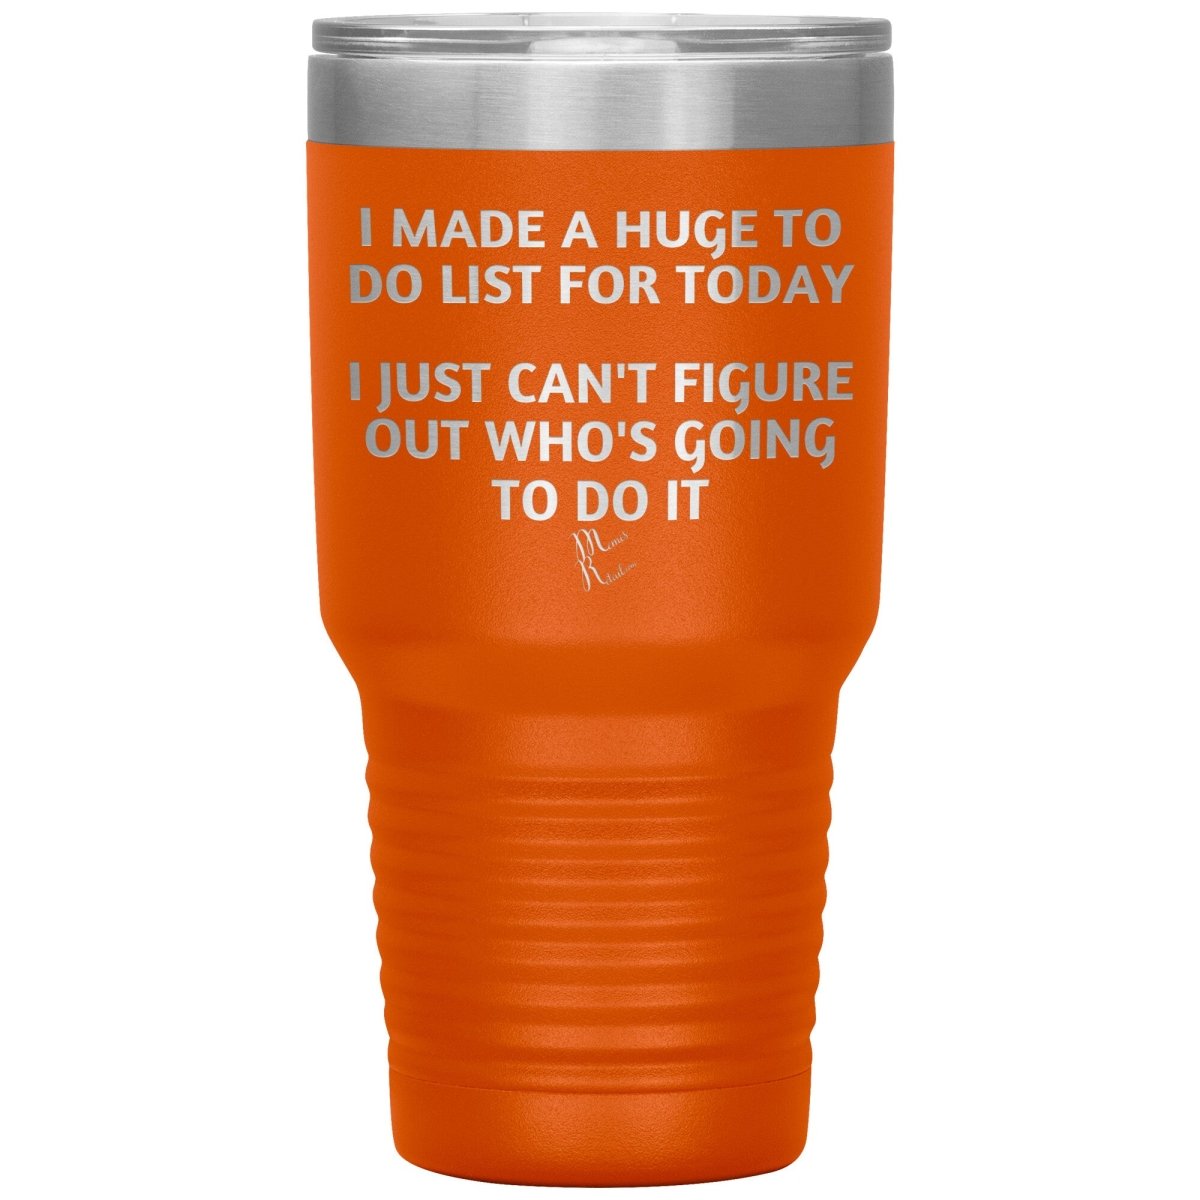 I made a huge to do list for today. I just can't figure out who's going to do it Tumblers, 30oz Insulated Tumbler / Orange - MemesRetail.com